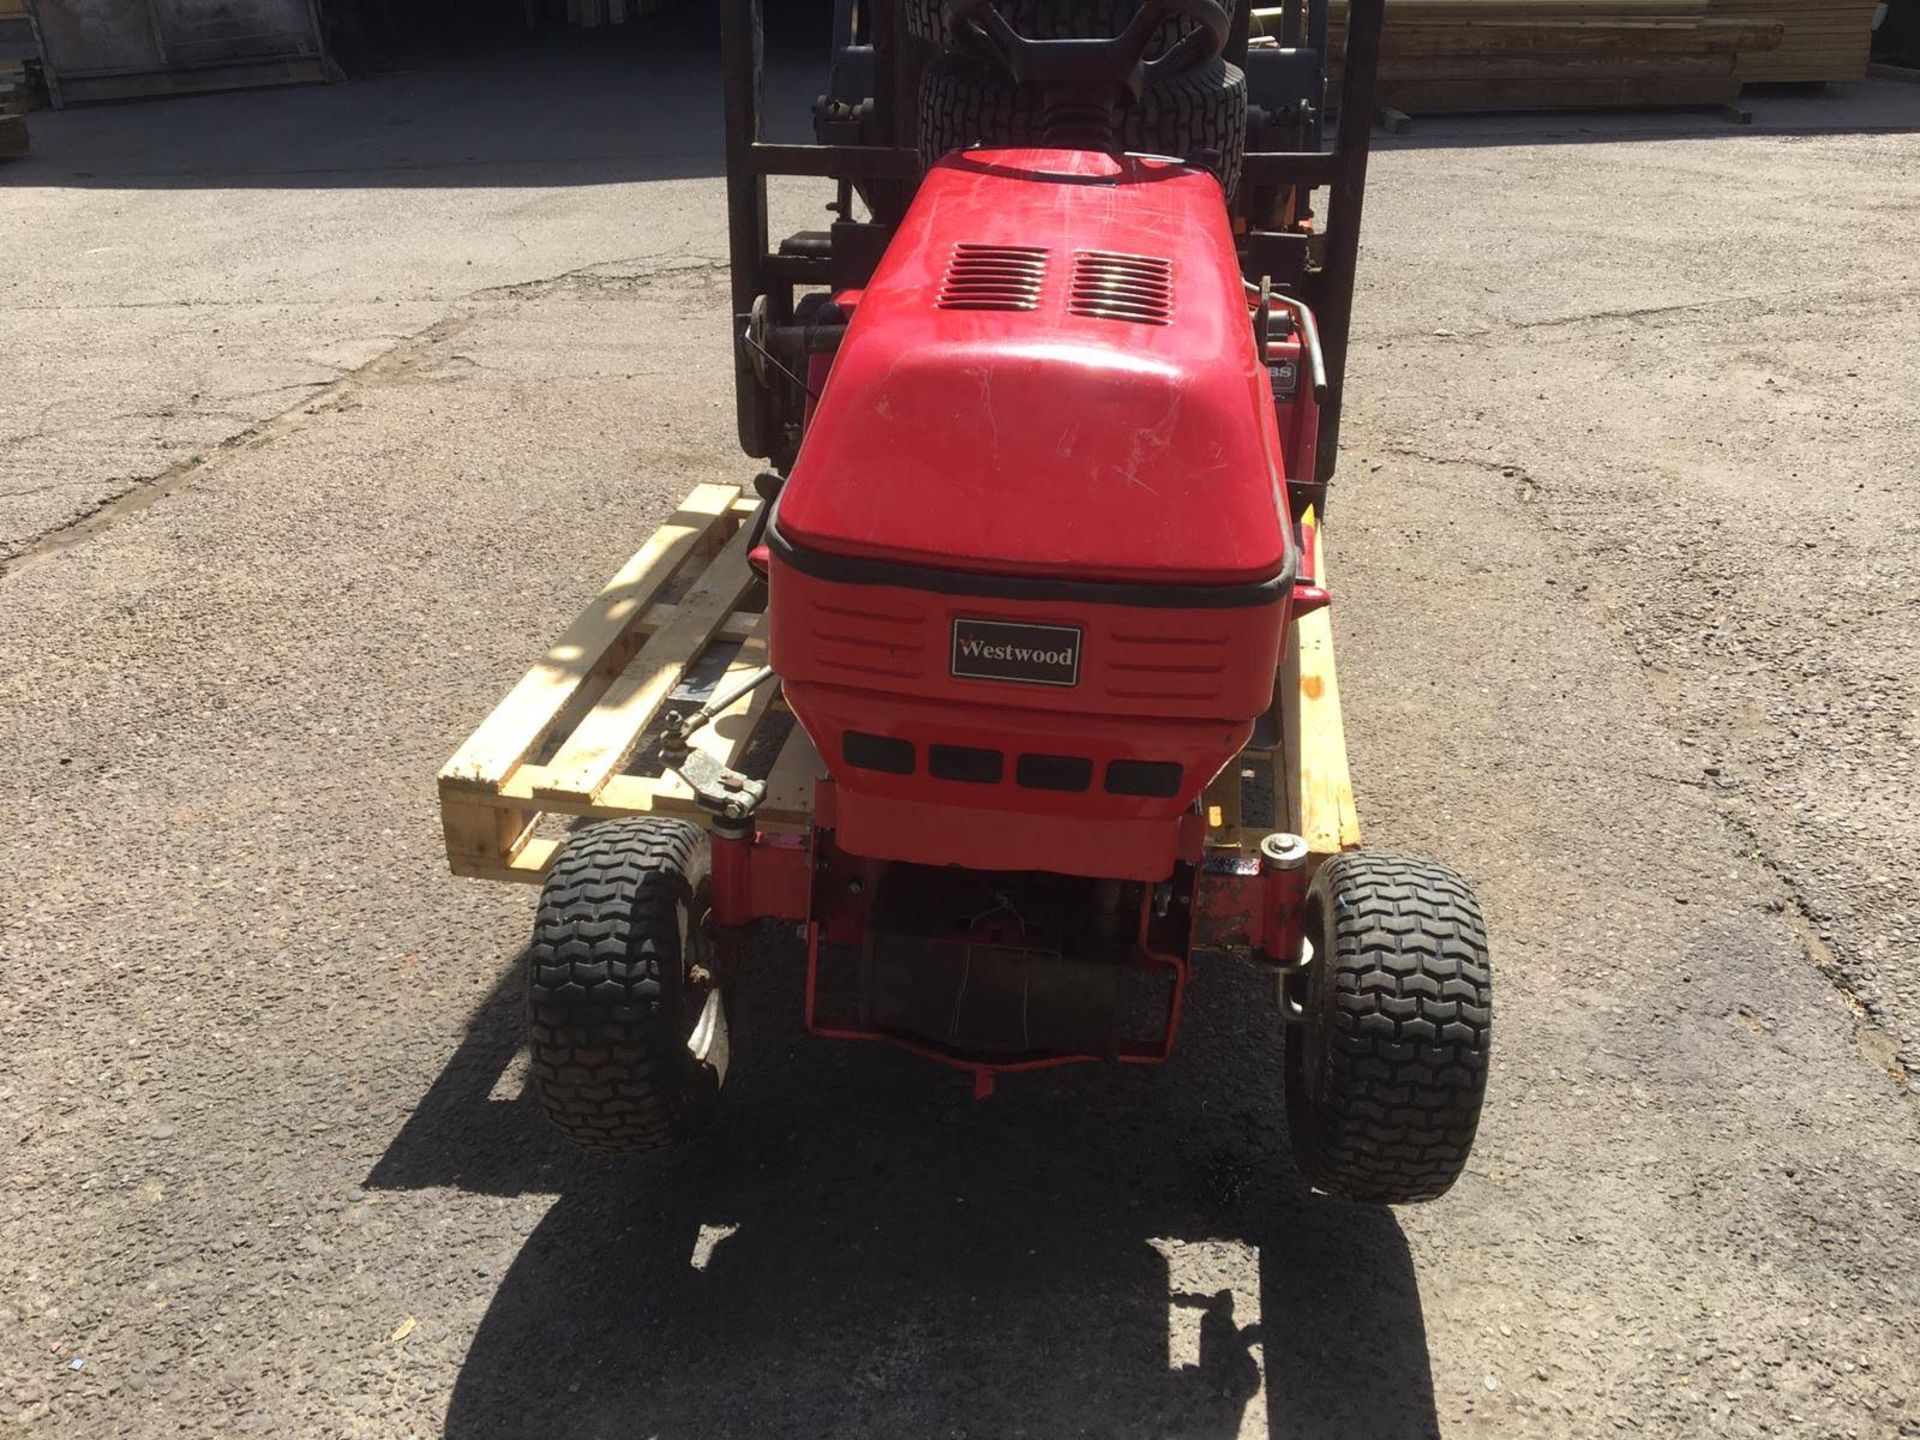 WESTWOOD S1300 RIDE ON LAWN MOWER, C/W DECK, WHEELS & GRASS COLLECTOR, SELLING AS SPARES / REPAIRS - Image 7 of 13